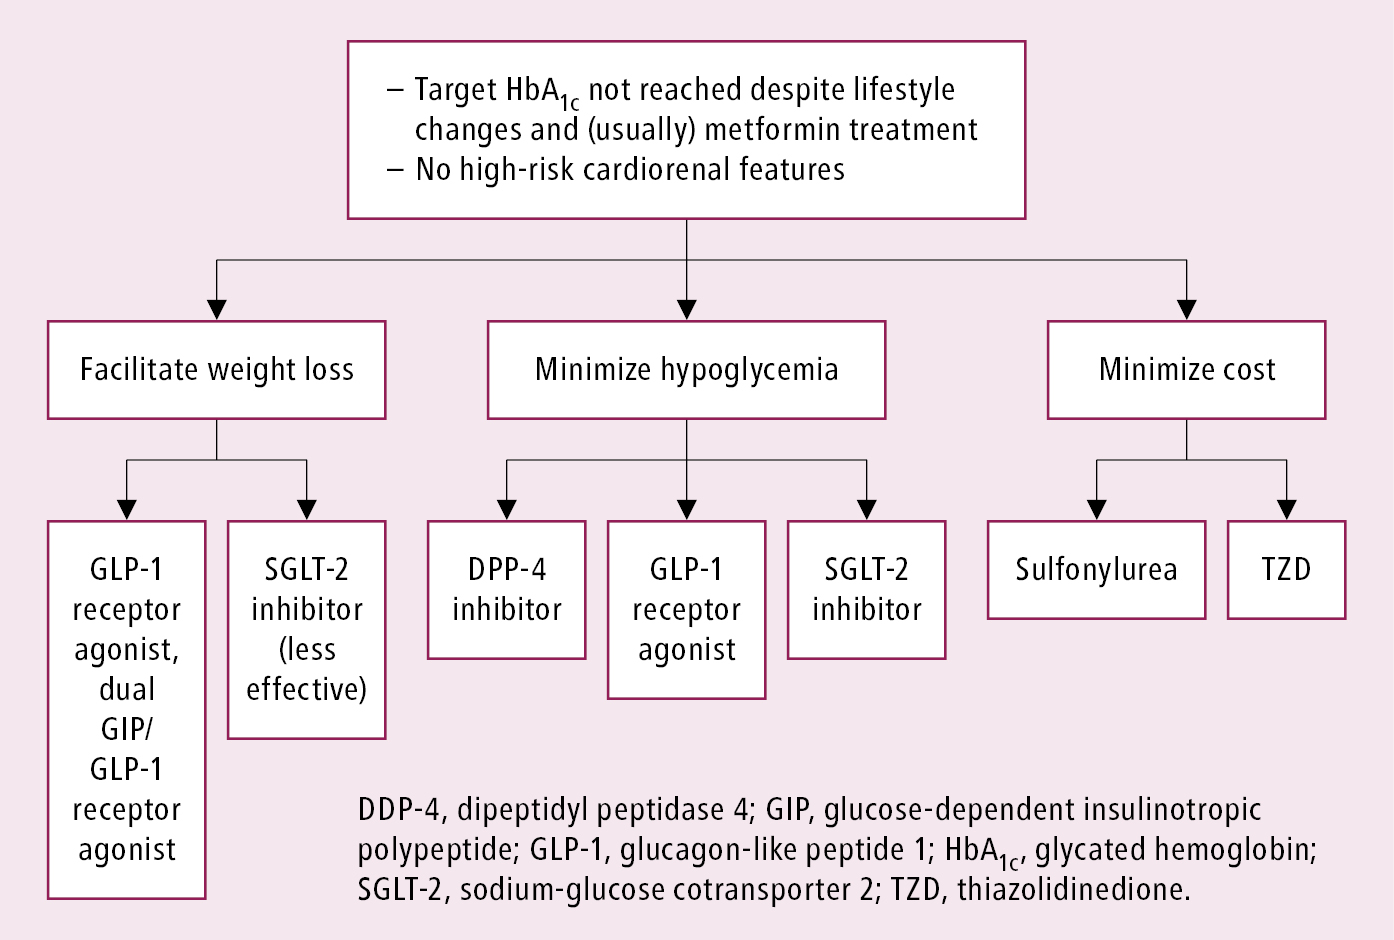 Figure 031_0635.  Algorithm for selection of glucose-lowering agents in patients with diabetes mellitus without high cardiovascular risk.  Adapted from  Diabetes Care. 2021 Jan;44(Suppl 1):S4-S6  and 2023 American Diabetes Association guidelines . 